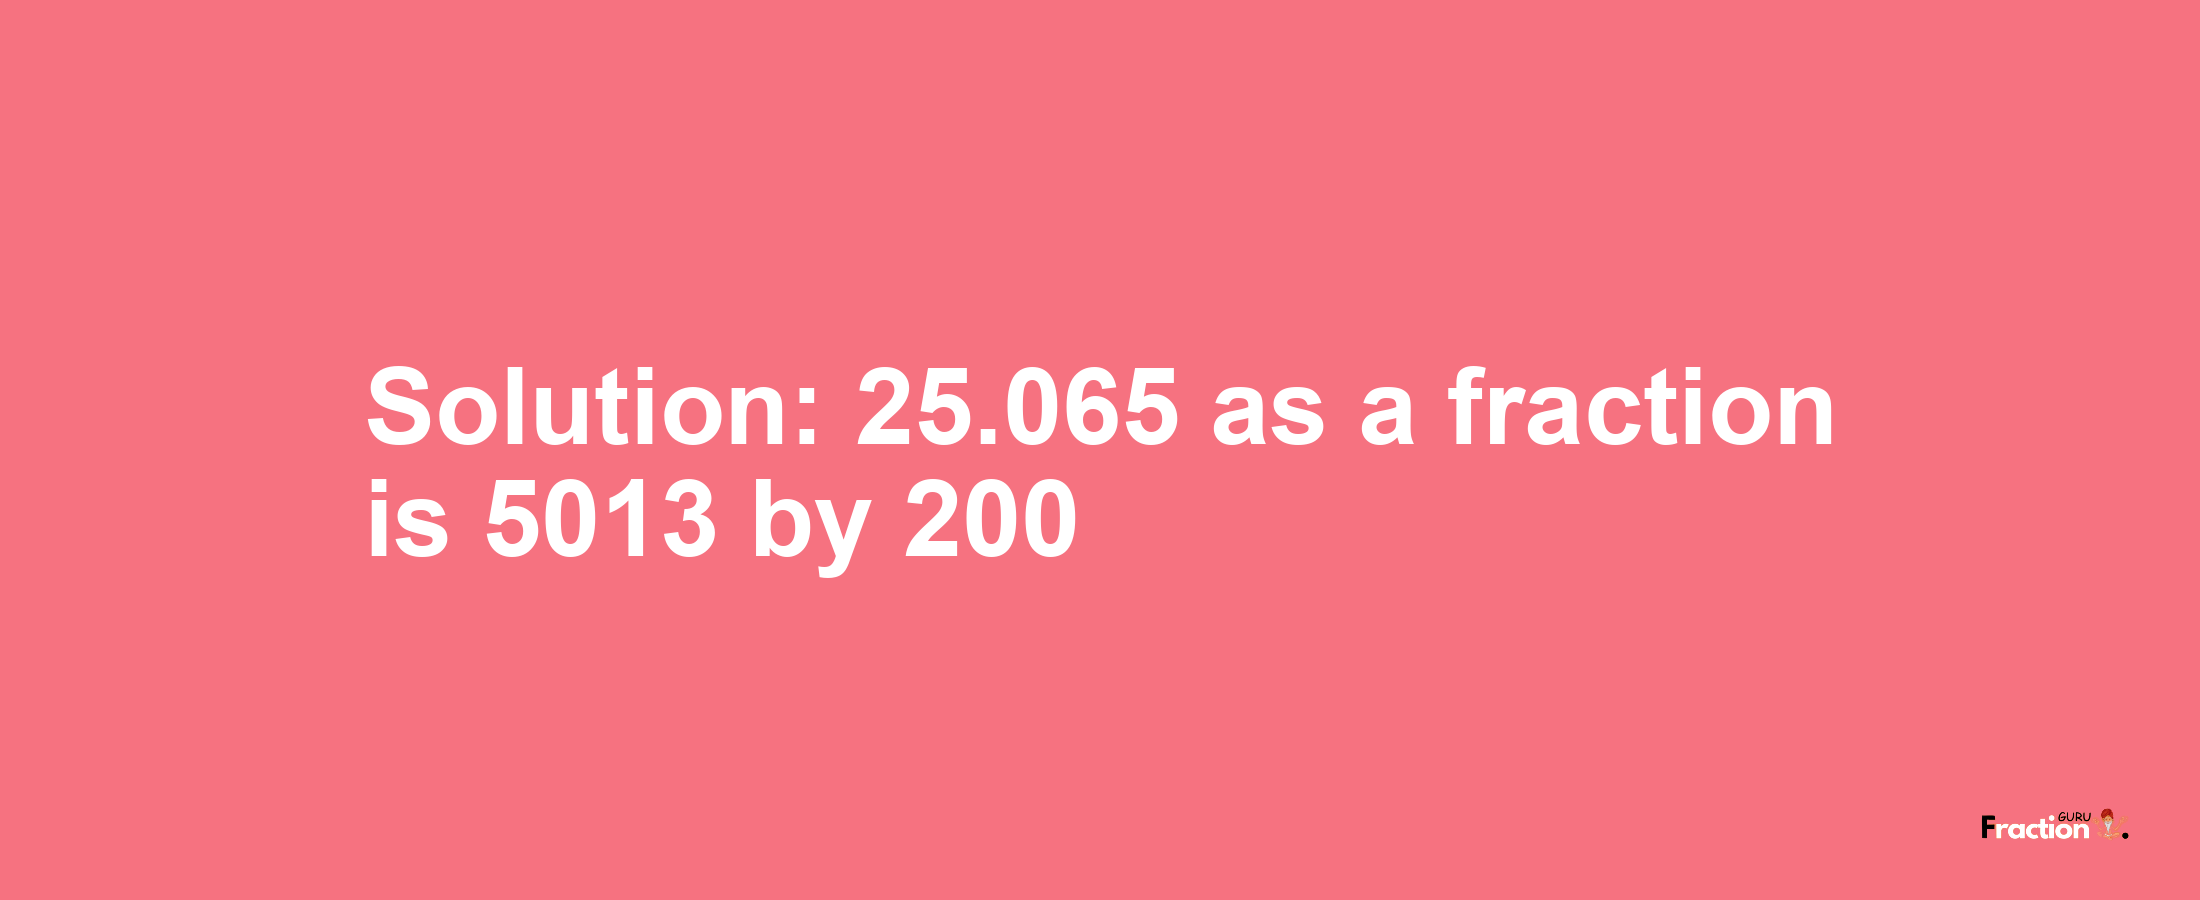 Solution:25.065 as a fraction is 5013/200